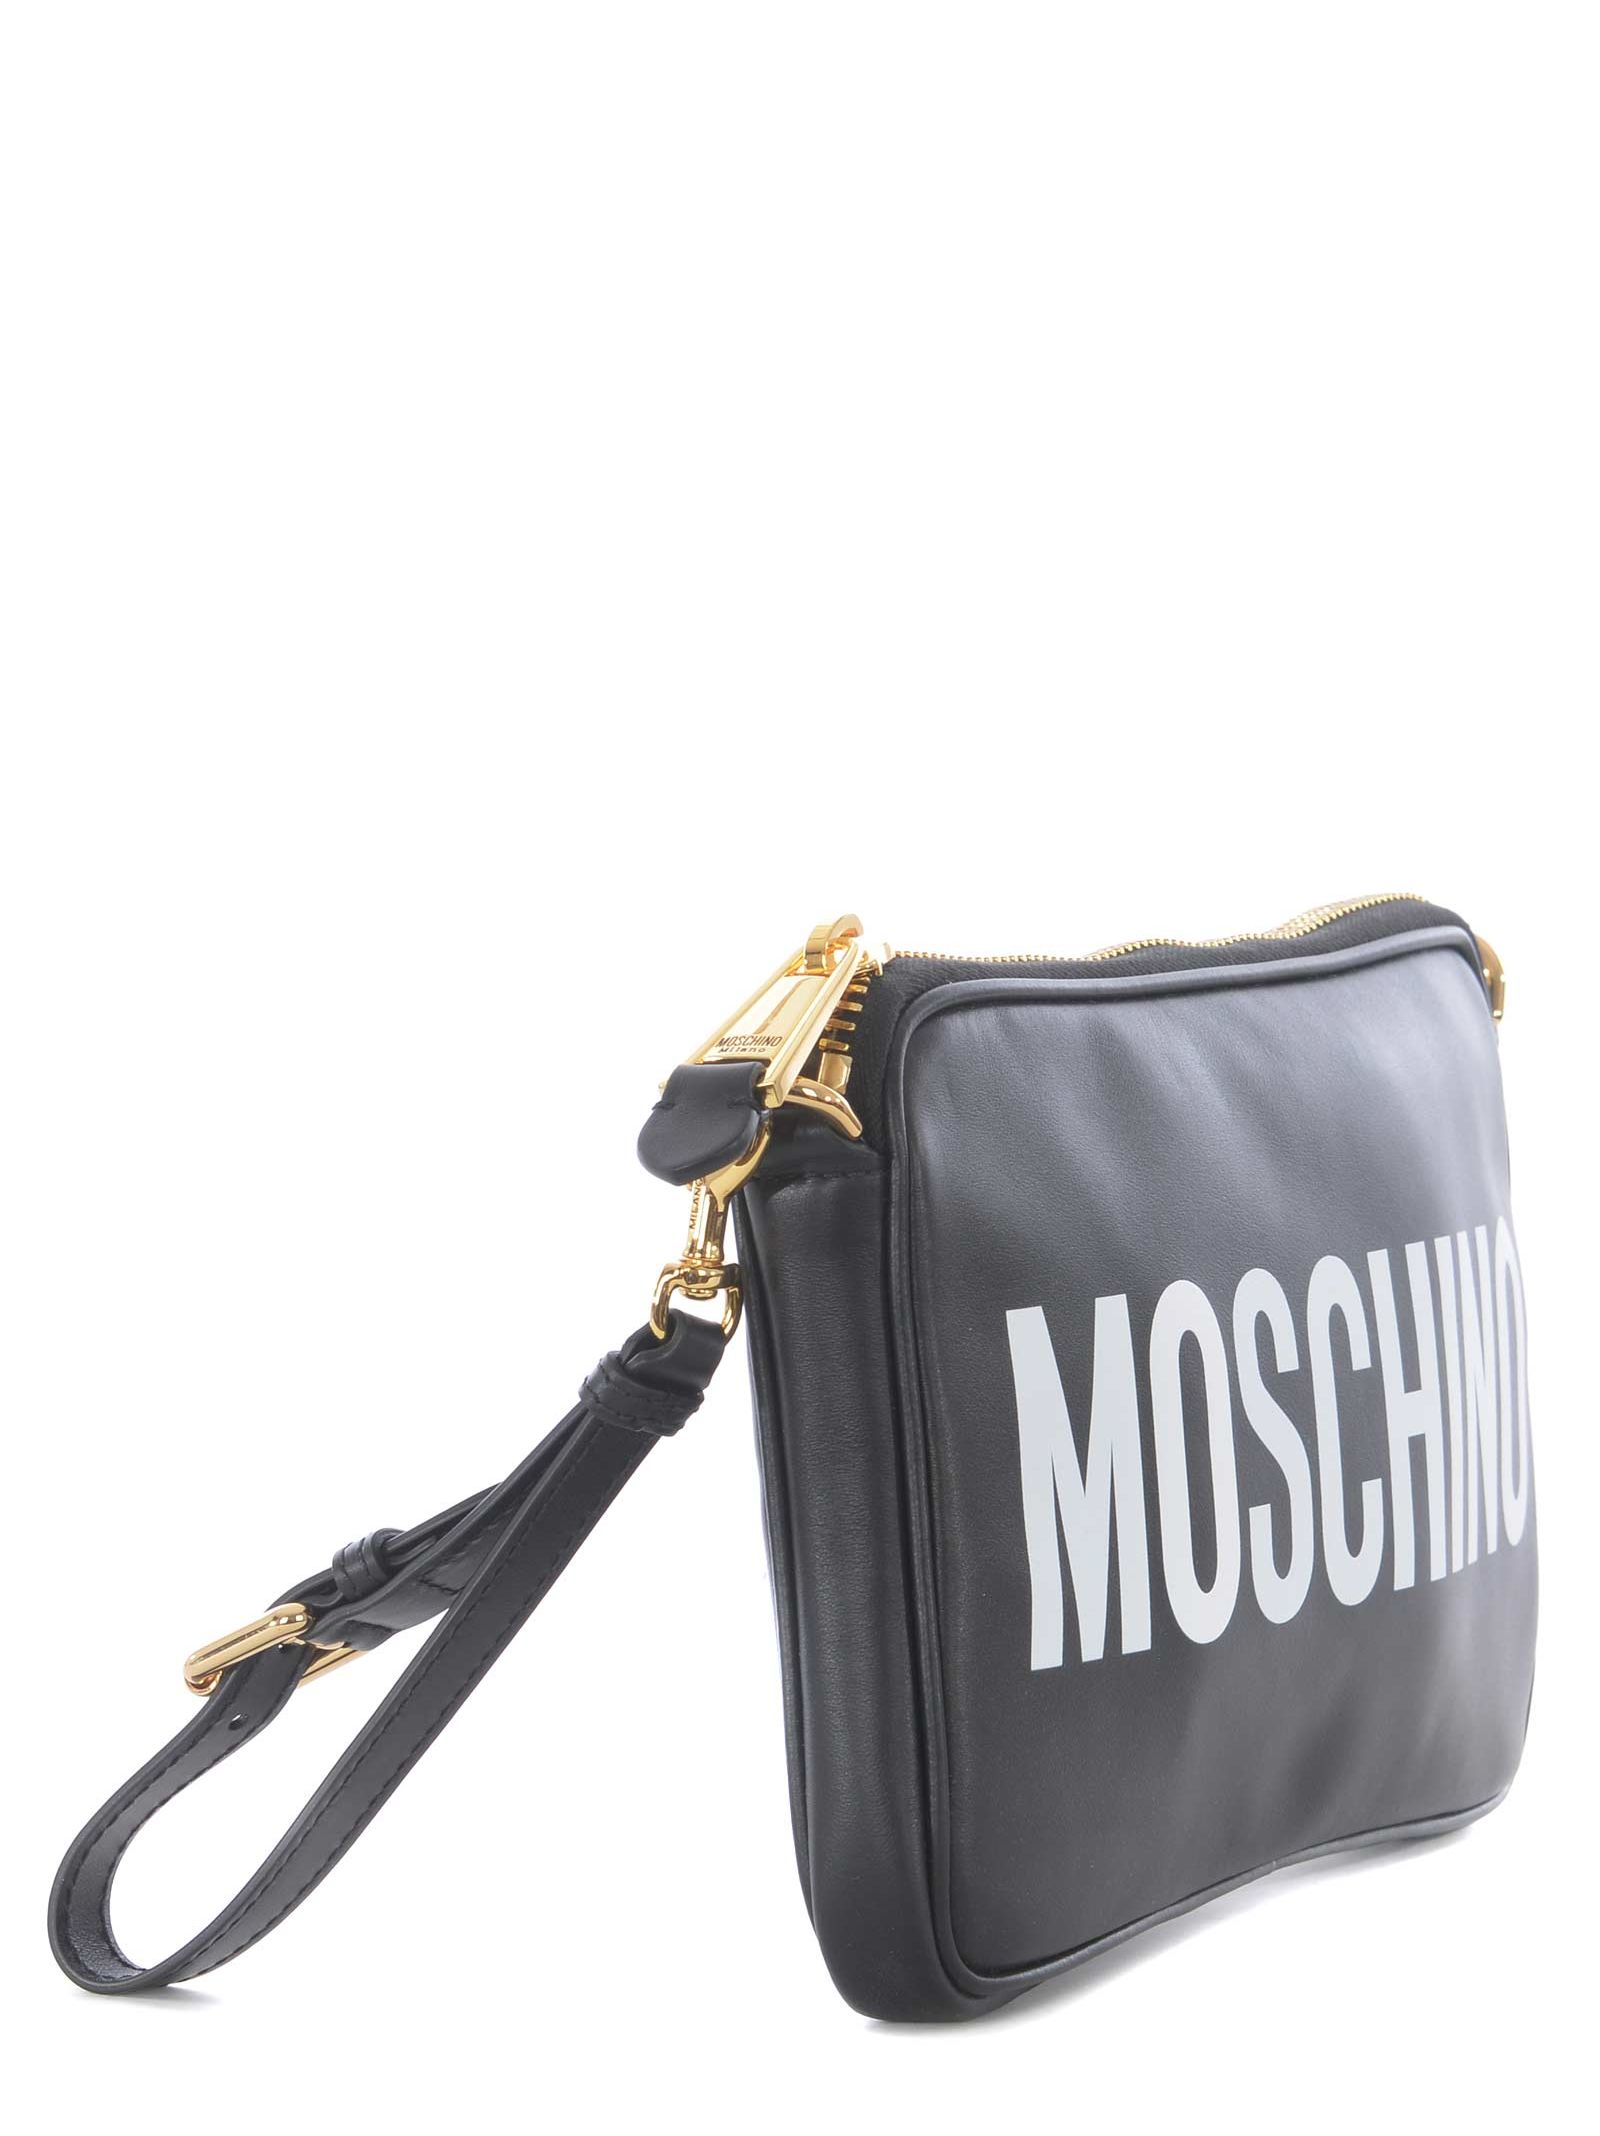 Moschino Shoulder Bags | italist 